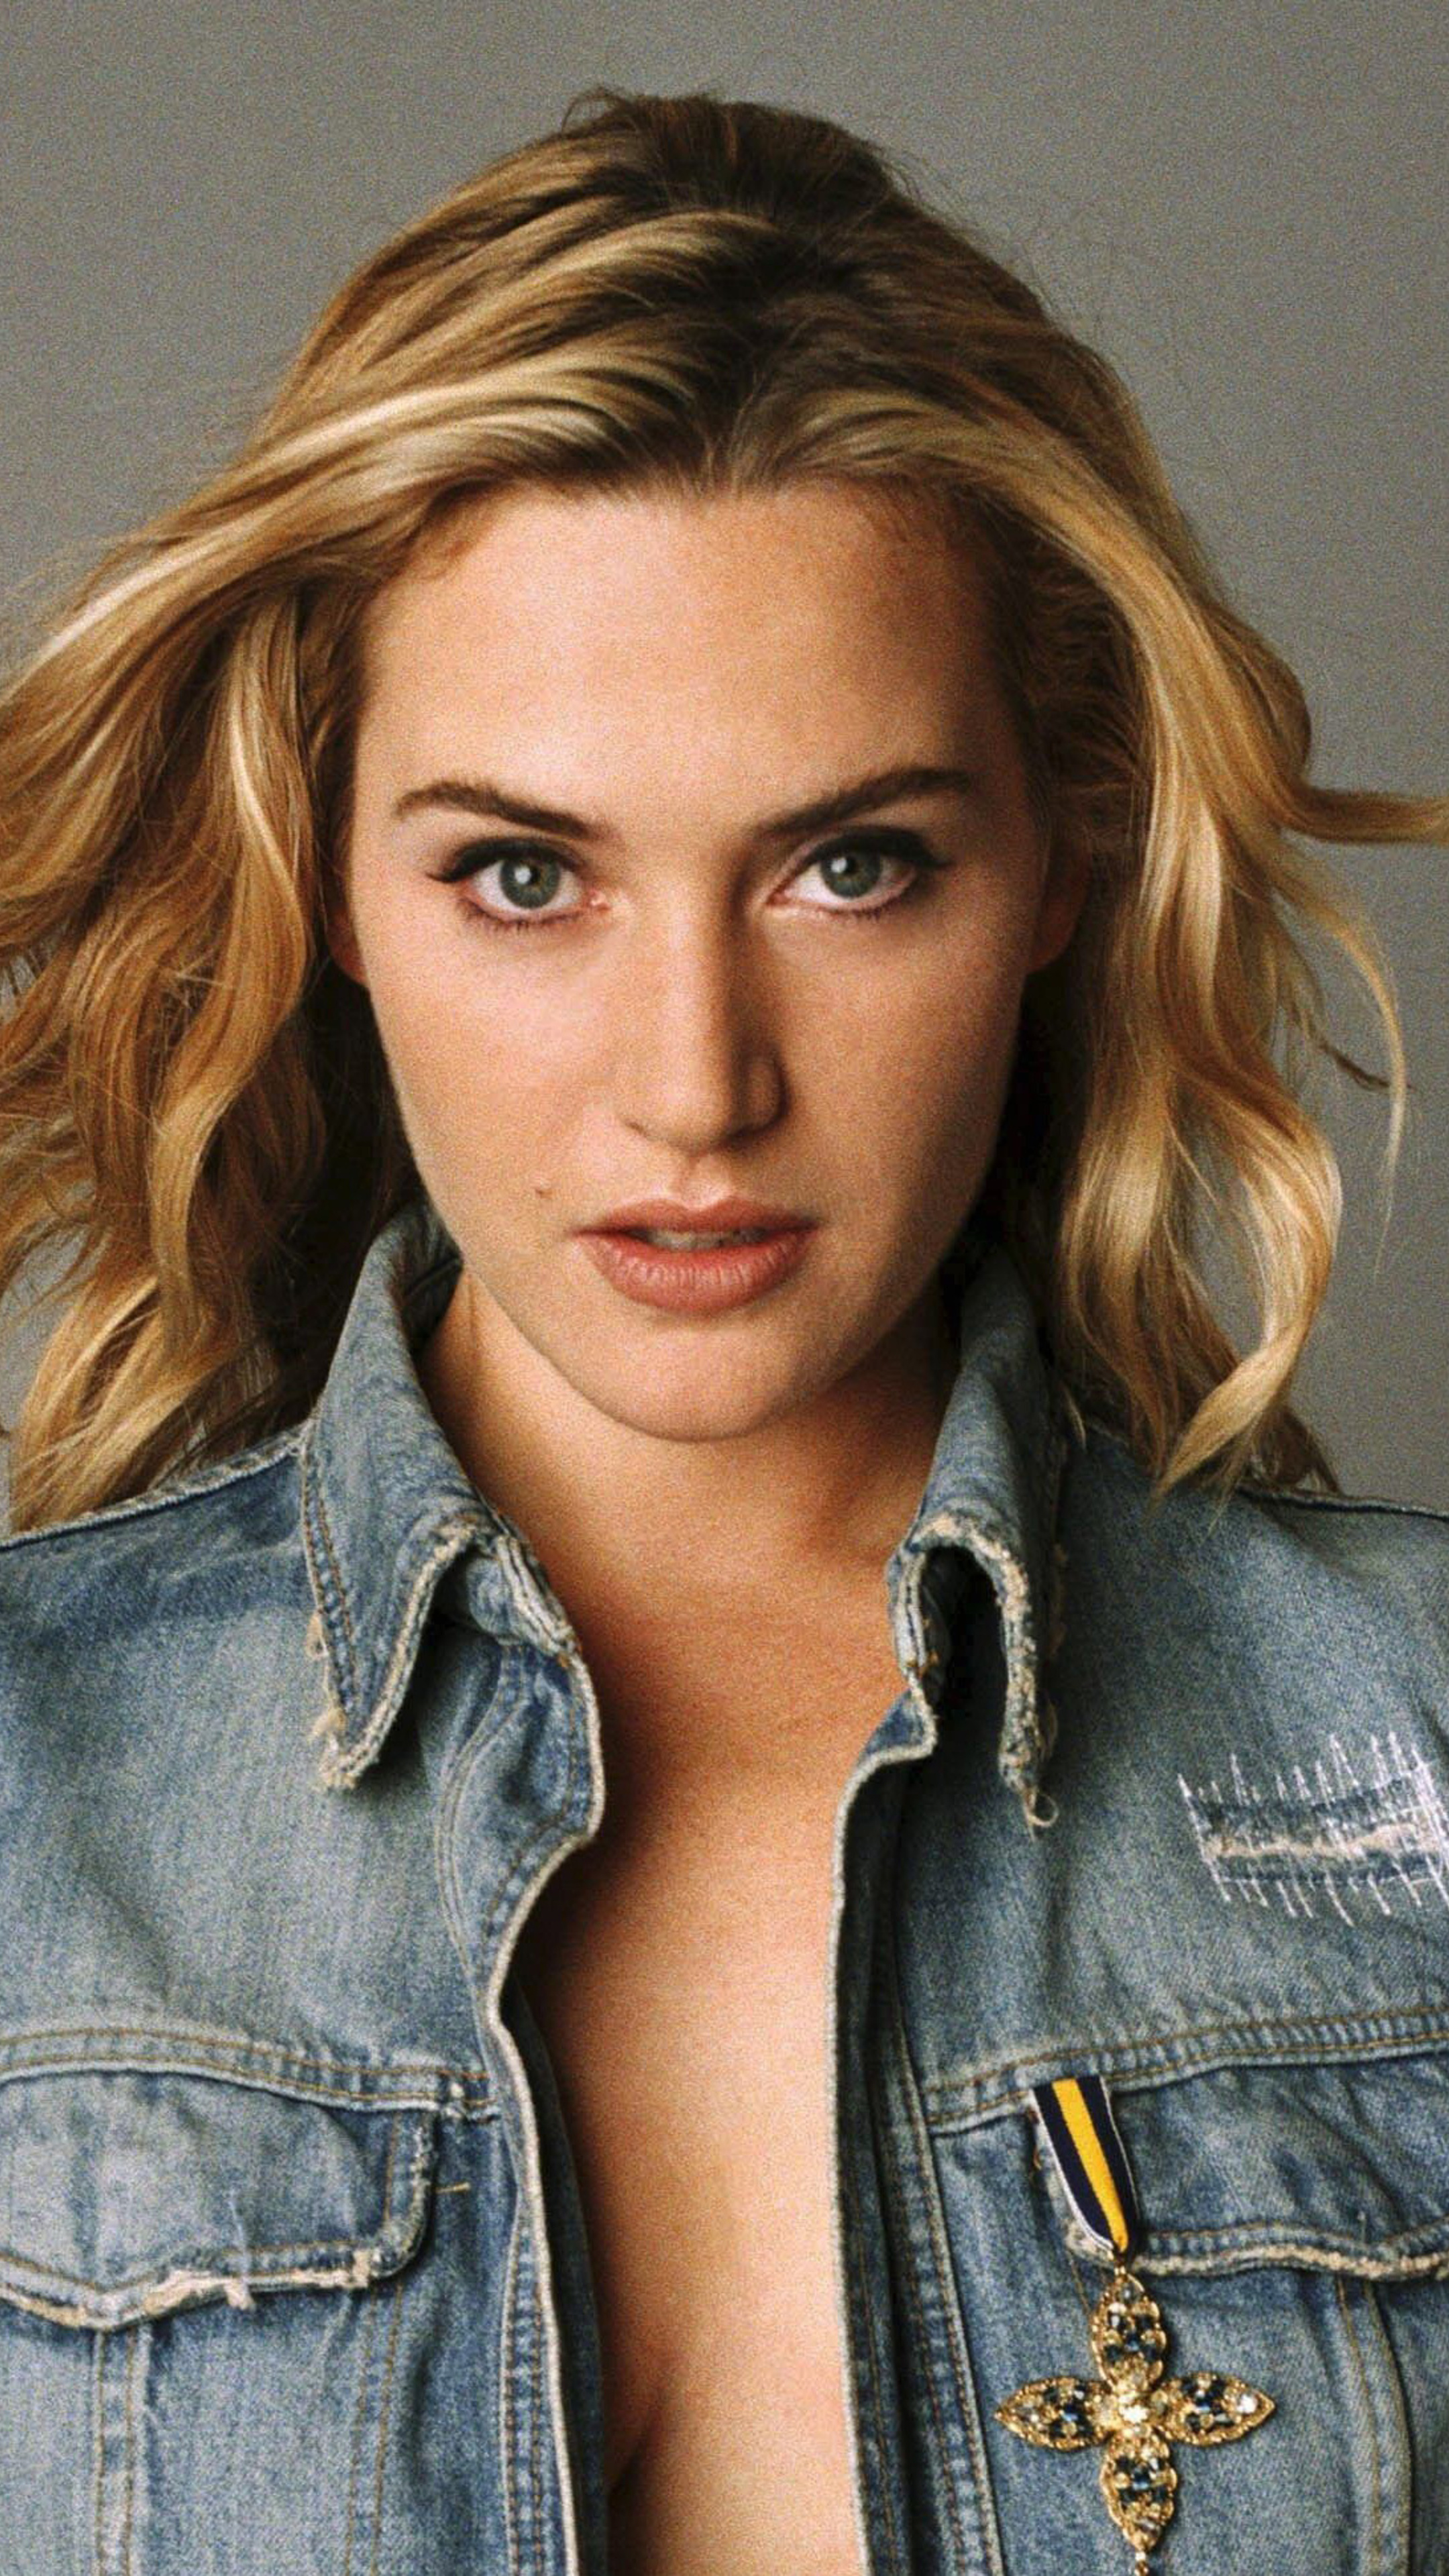 Kate Winslet, 2018 4K images, Premium HD wallpapers, Sony Xperia photos, 2160x3840 4K Phone